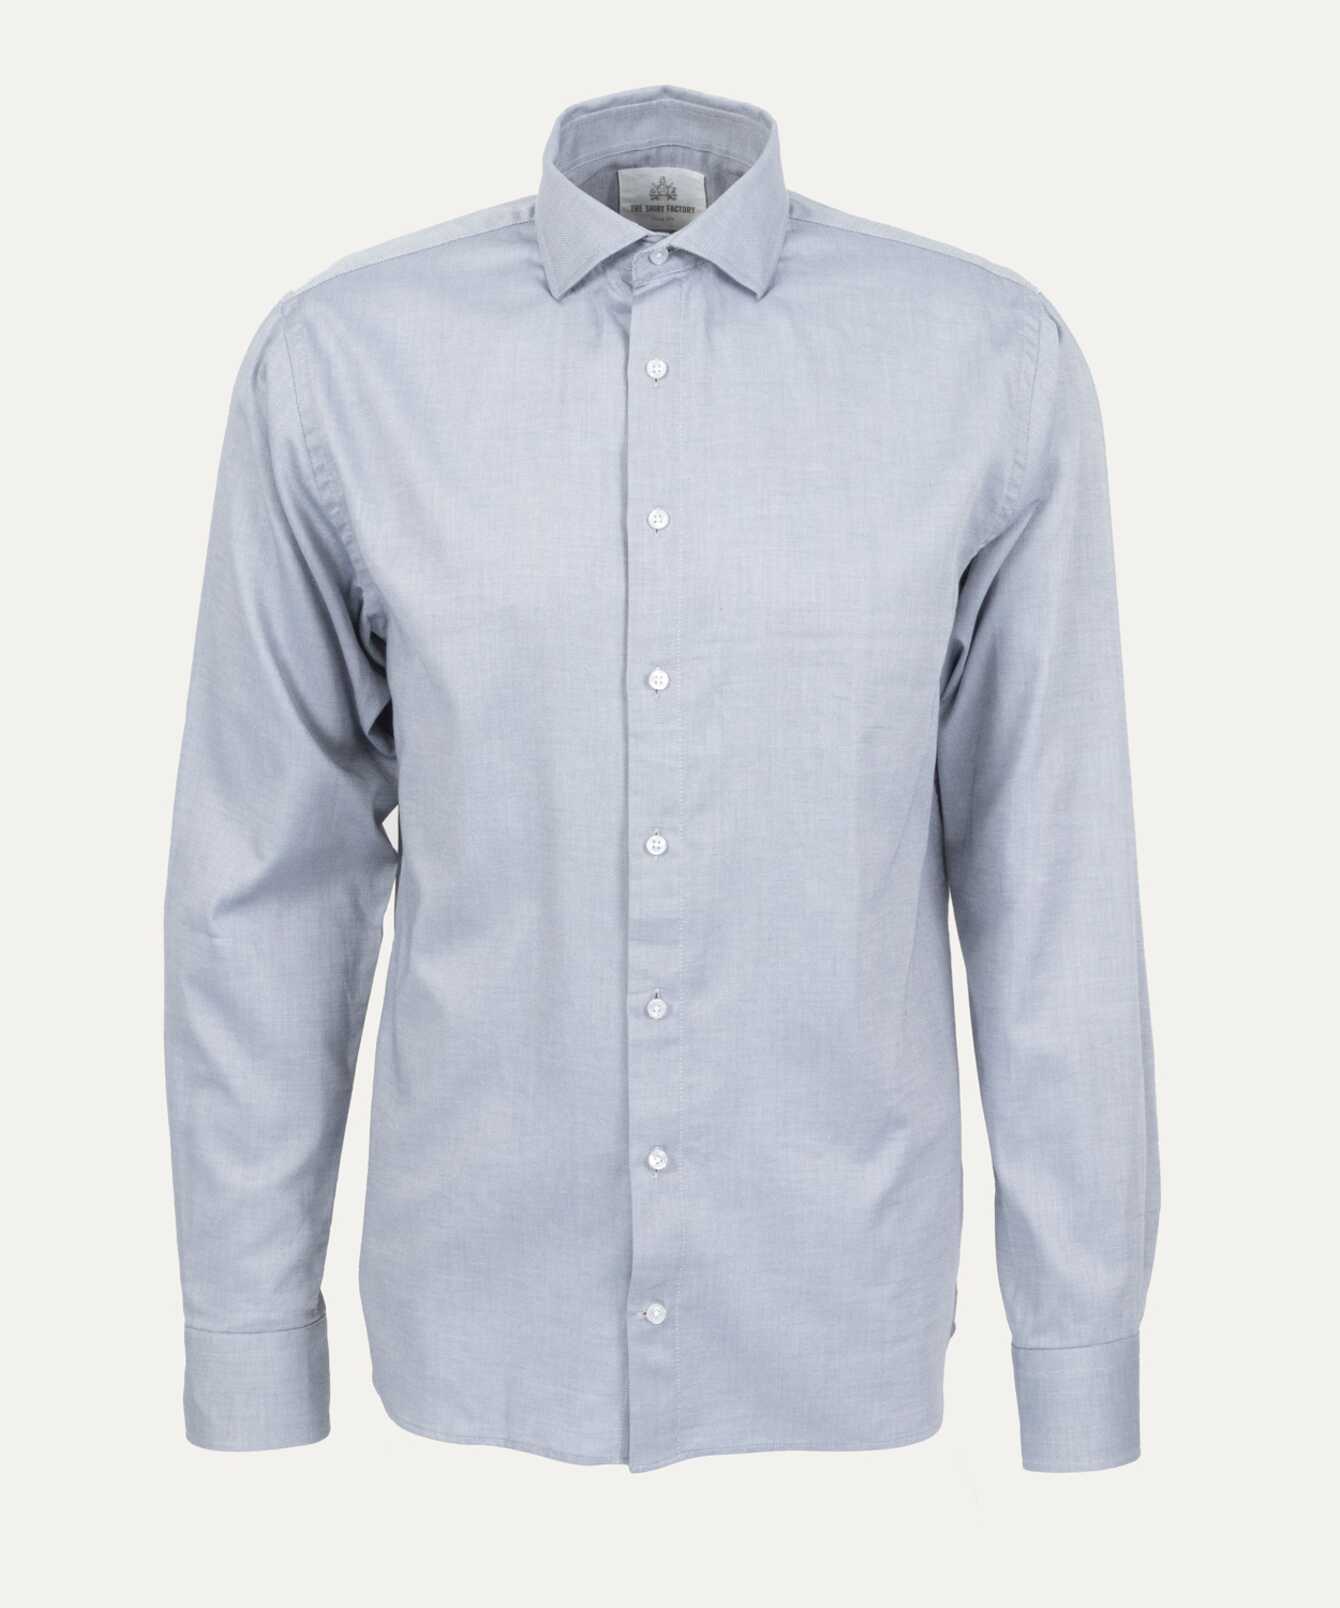 Shirt Mayfair Steel Blue Dobby Shirt with Microstructure The Shirt Factory